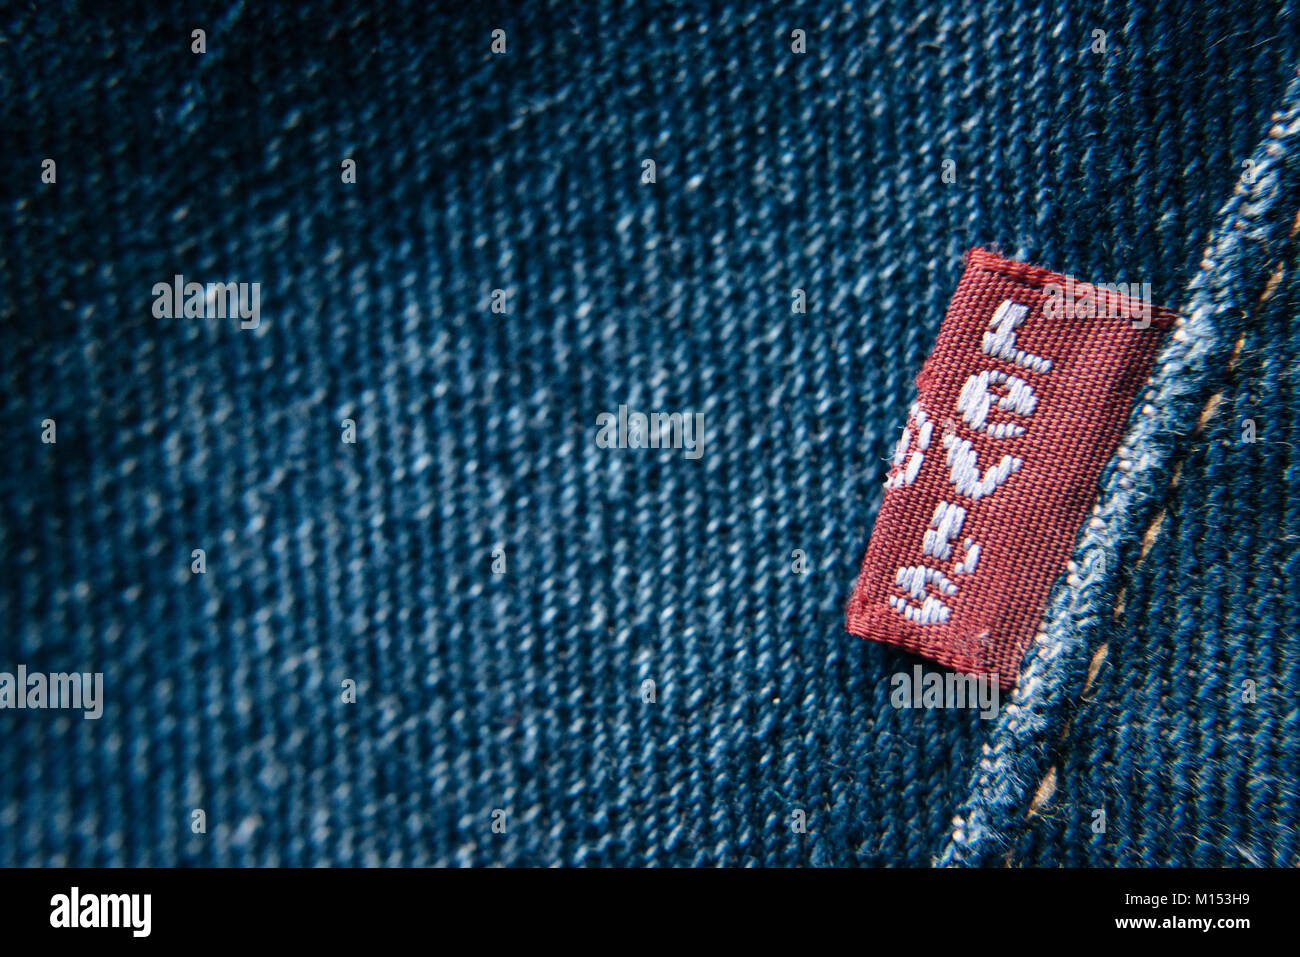 Levi Jeans High Resolution Stock Photography and Images - Alamy